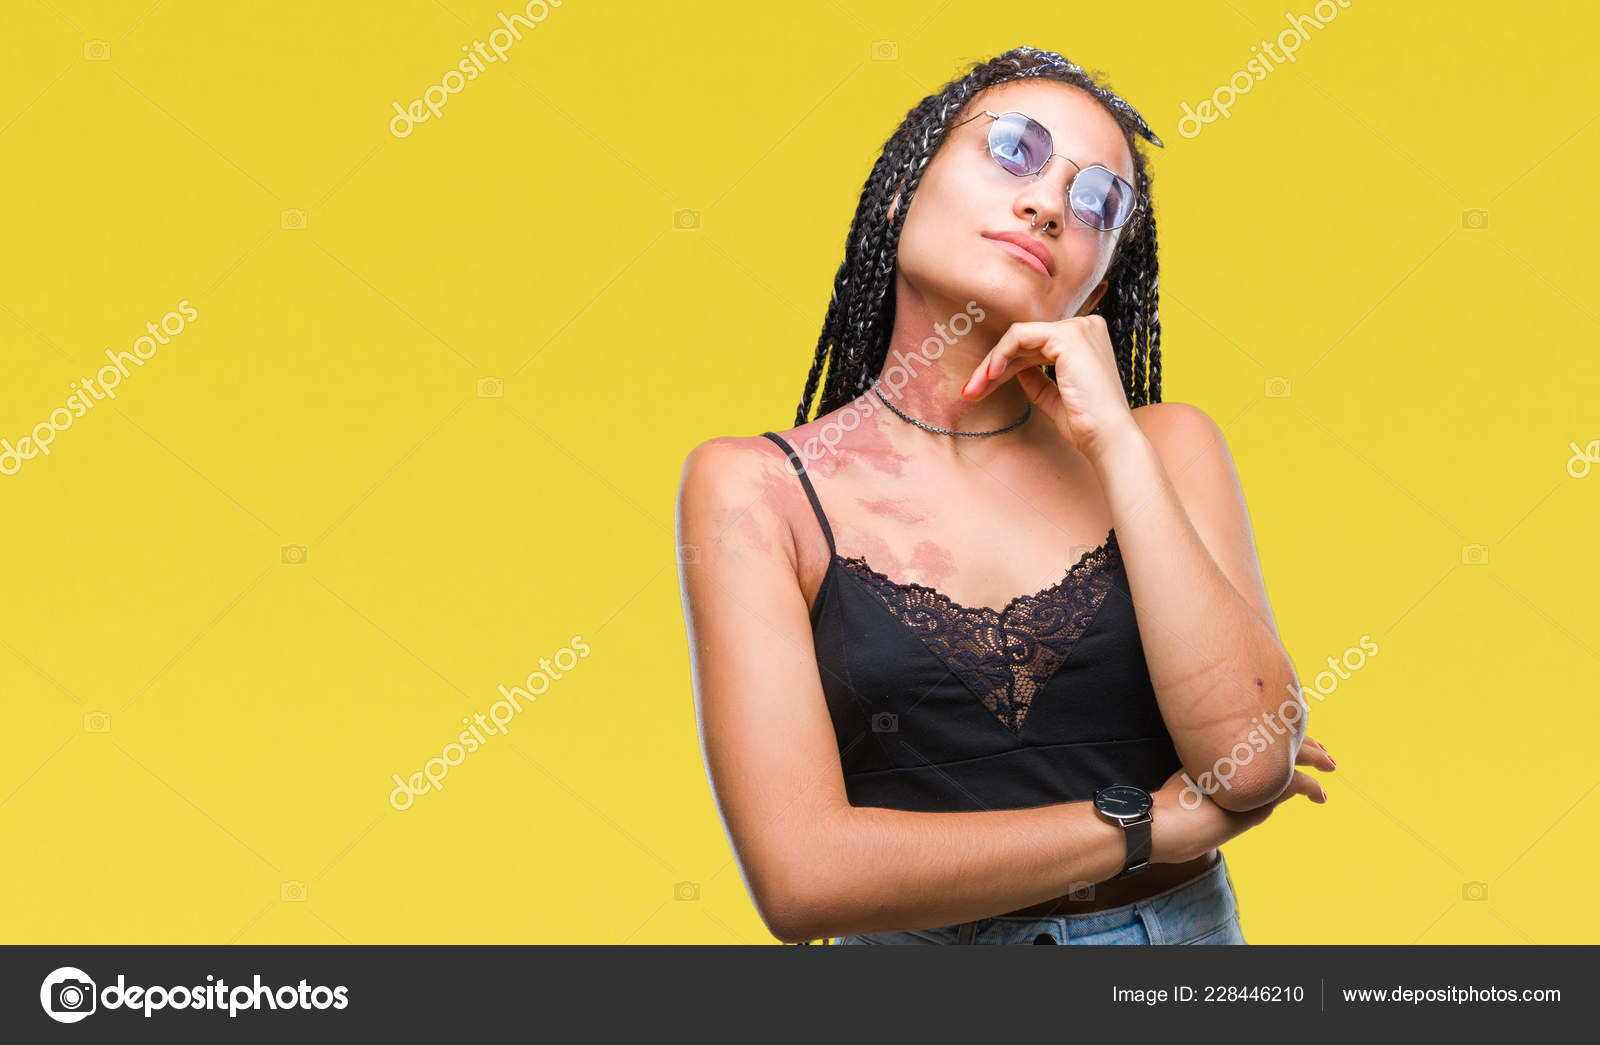 Young Braided Hair African American Birth Mark Wearing Sunglasses